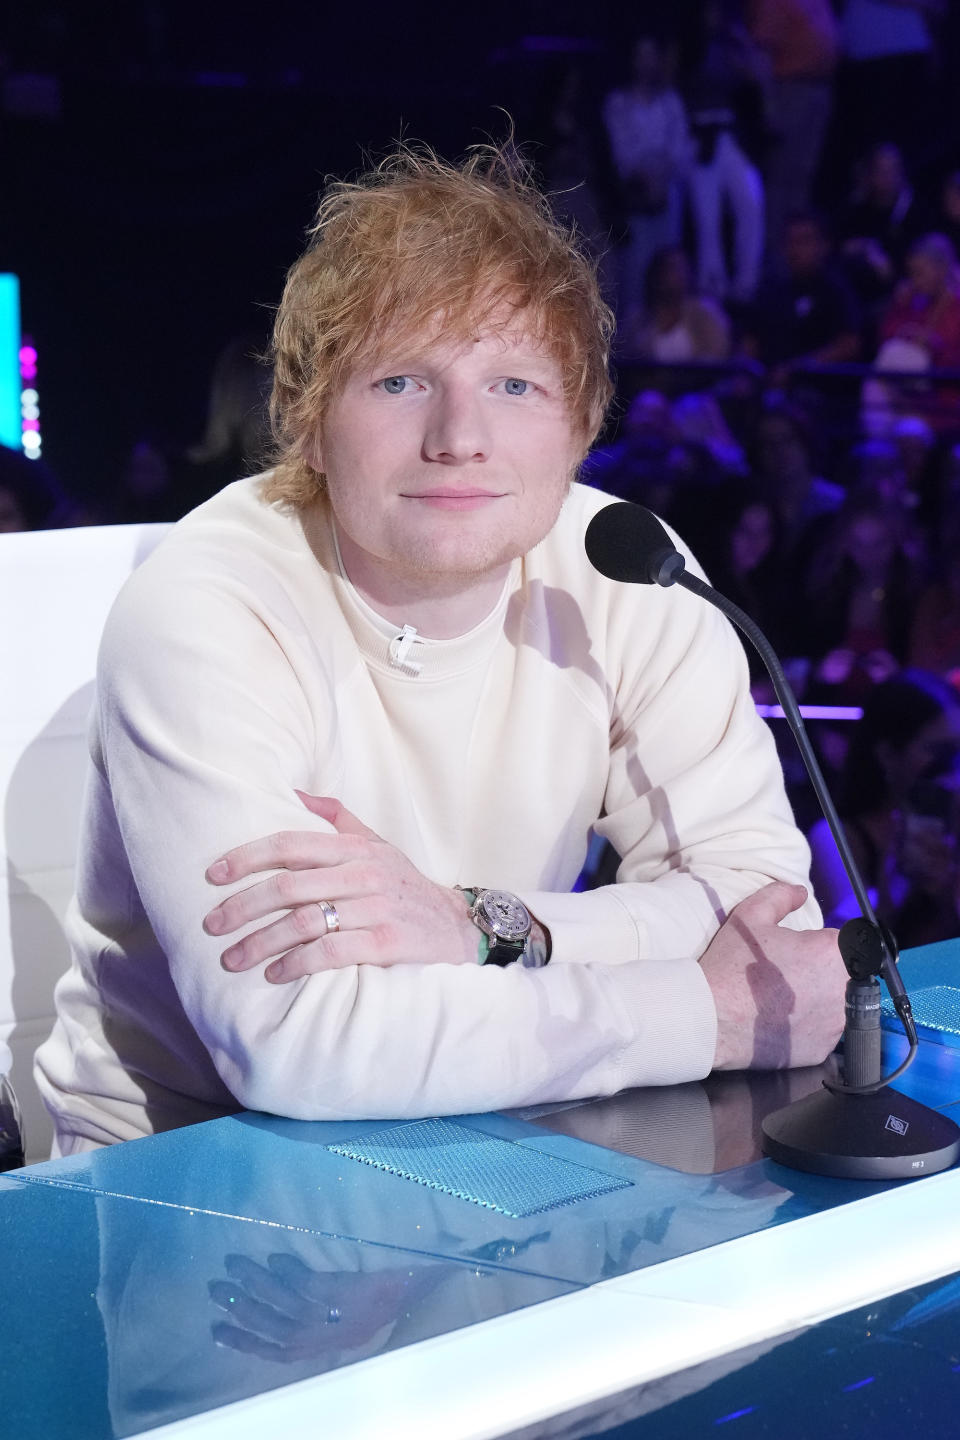 ed sitting at a judge's table